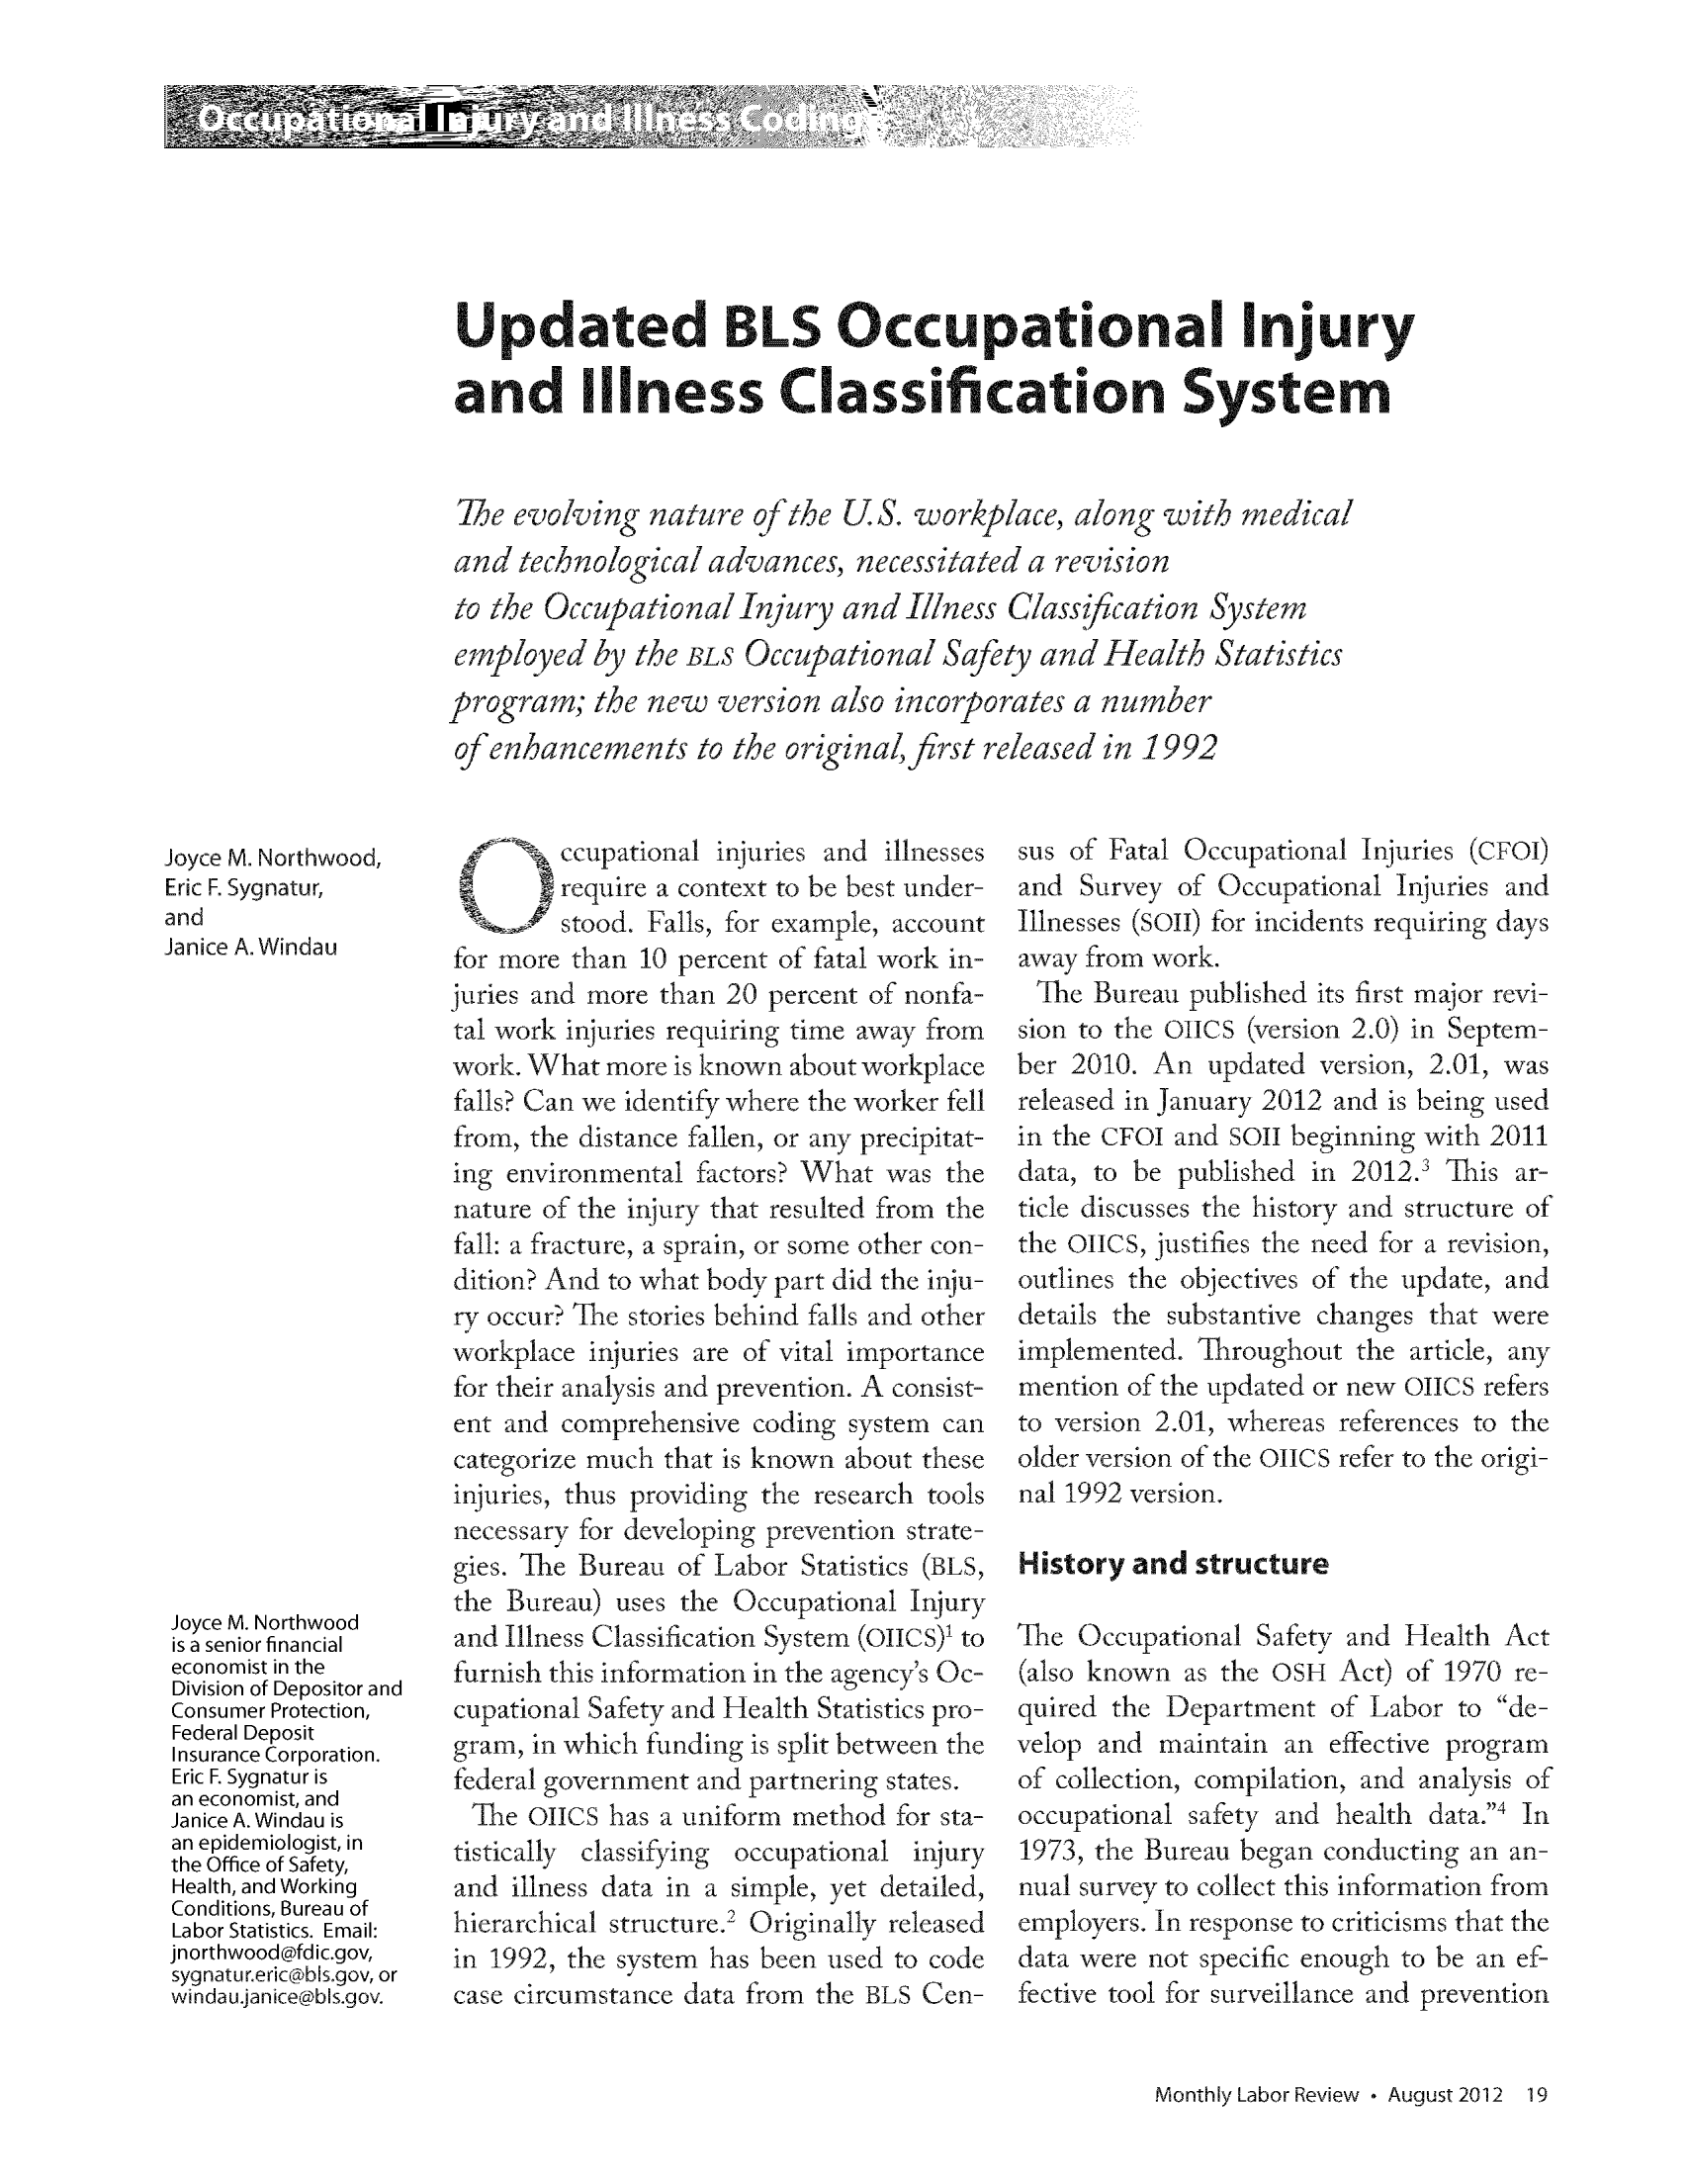 handle is hein.journals/month135 and id is 1012 raw text is: Updated BLS Occupational Injury
and illness Classification System
Tie evolving nature ofthe US. workplace, along with medical
and technological advances, necessitated a revision
to the OccupationalInjury and Illness Classification System
employed by the BLs Occupational Safety and Health Statistics
program; the new version also incorporates a number
of enhancements to the originafirst released in 1992

Joyce M. Northwood,
Eric F. Sygnatur,
and
Janice A. Windau
Joyce M. Northwood
is a senior financial
economist in the
Division of Depositor and
Consumer Protection,
Federal Deposit
Insurance Corporation.
Eric F. Sygnatur is
an economist, and
Janice A. Windau is
an epidemiologist, in
the Office of Safety,
Health, and Working
Conditions, Bureau of
Labor Statistics. Email:
jnorthwood@fdic.gov,
sygnatur.eric@bls.gov, or
windau.janice@bls.gov.

ccupational injuries and illnesses
S    _ ~ require a context to be best under-
stood. Falls, for example, account
for more than 10 percent of fatal work in-
juries and more than 20 percent of nonfa-
tal work injuries requiring time away from
work. What more is known about workplace
falls? Can we identify where the worker fell
from, the distance fallen, or any precipitat-
ing environmental factors? What was the
nature of the injury that resulted from the
fall: a fracture, a sprain, or some other con-
dition? And to what body part did the inju-
ry occur? The stories behind falls and other
workplace injuries are of vital importance
for their analysis and prevention. A consist-
ent and comprehensive coding system can
categorize much that is known about these
injuries, thus providing the research tools
necessary for developing prevention strate-
gies. The Bureau of Labor Statistics (BLS,
the Bureau) uses the Occupational Injury
and Illness Classification System (011CS)' to
furnish this information in the agency's Oc-
cupational Safety and Health Statistics pro-
gram, in which finding is split between the
federal government and partnering states.
The 011cs has a uniform method for sta-
tistically  classifying  occupational injury
and illness data in a simple, yet detailed,
hierarchical structure. Originally released
in 1992, the system has been used to code
case circumstance data from the BLS Cen-

sus of Fatal Occupational Injuries (CFuI)
and Survey of Occupational Injuries and
Illnesses (Soil) for incidents requiring days
away from work.
ihe Bureau published its first major revi-
sion to the OICS (version 2.0) in Septem-
ber 2010. An updated version, 2.01, was
released in January 2012 and is being used
in the CFI and SOil beginning with 2011
data, to be published in 2012.' This ar-
ticle discusses the history and structure of
the OIICS, justifies the need for a revision,
outlines the objectives of the update, and
details the substantive changes that were
implemented. Throughout the article, any
mention of the updated or new 011cs refers
to version 2.01, whereas references to the
older version of the OIICS refer to the origi-
nal 1992 version.
History and structure
The Occupational Safety and Health Act
(also known as the OSH Act) of 1970 re-
quired the Department of Labor to de-
velop and maintain an effective program
of collection, compilation, and analysis of
occupational safety and health data.4 In
1973, the Bureau began conducting an an-
nual survey to collect this information from
employers. In response to criticisms that the
data were not specific enough to be an ef-
fective tool for surveillance and prevention

Monthly Labor Review  August 2012 19


